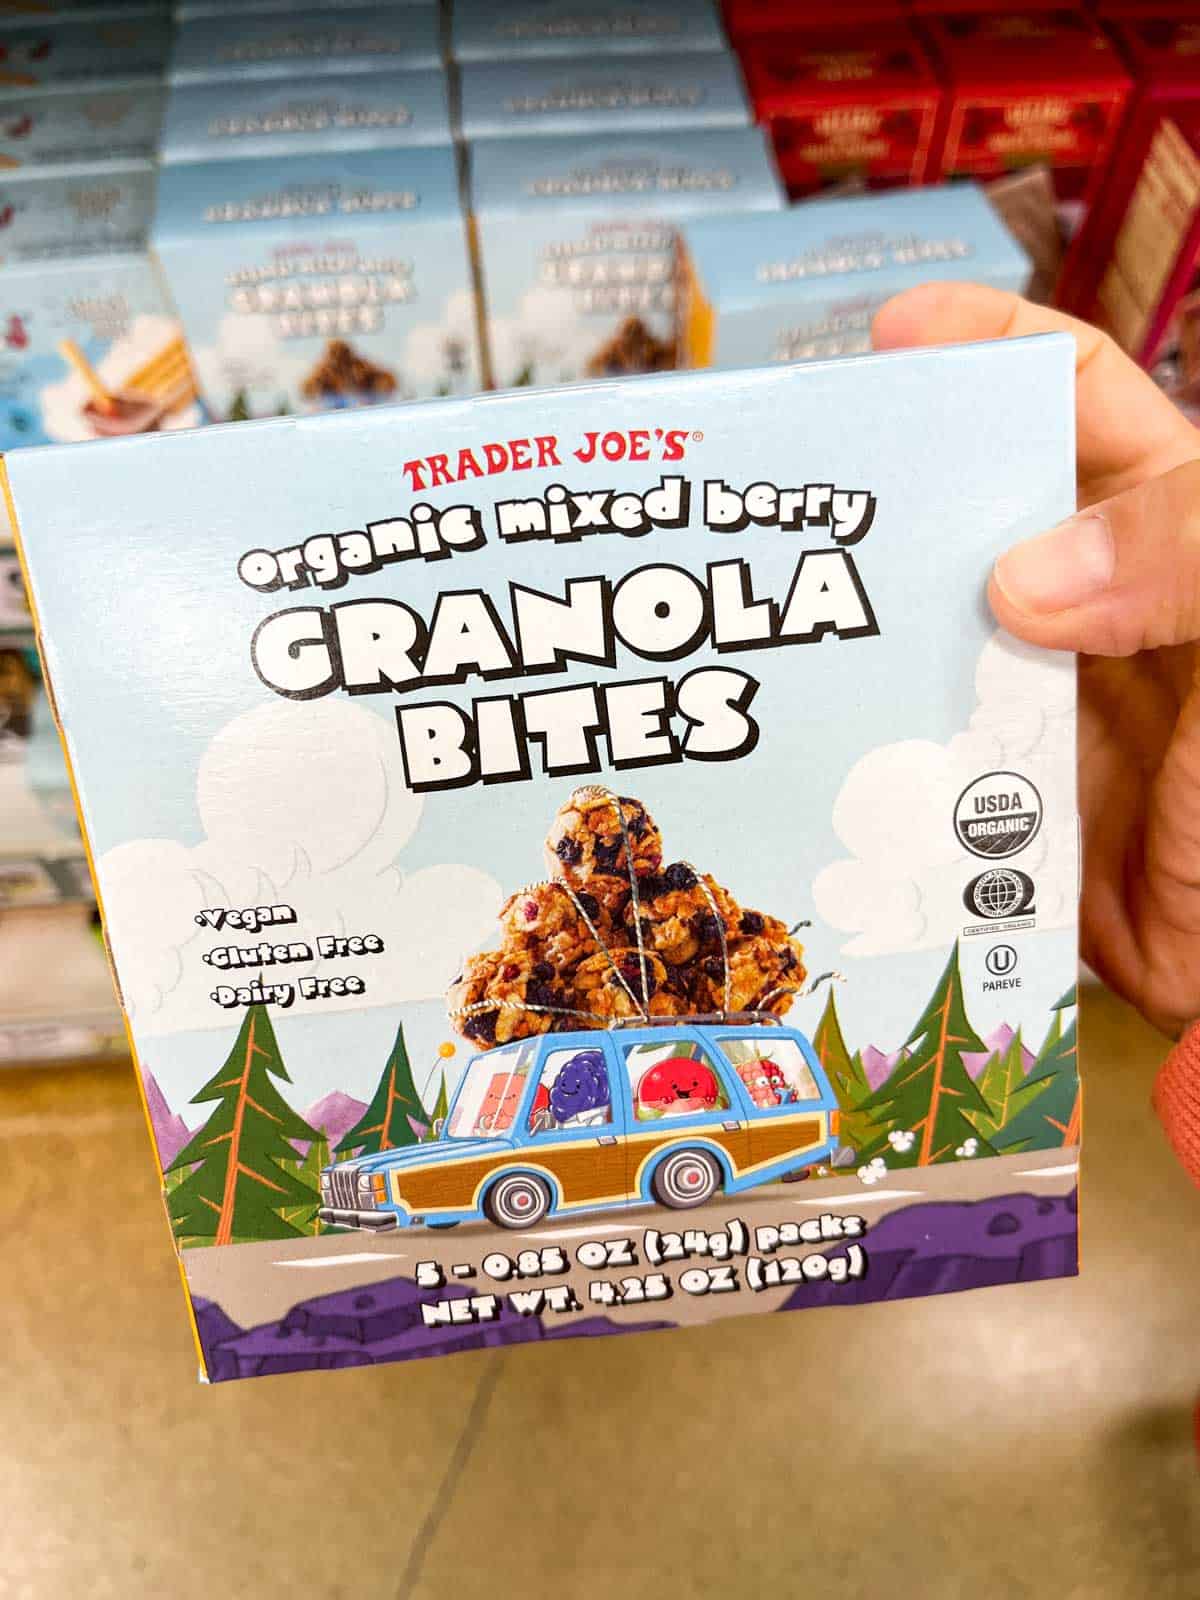 A hand holding a box of granola bites from Trader Joe's